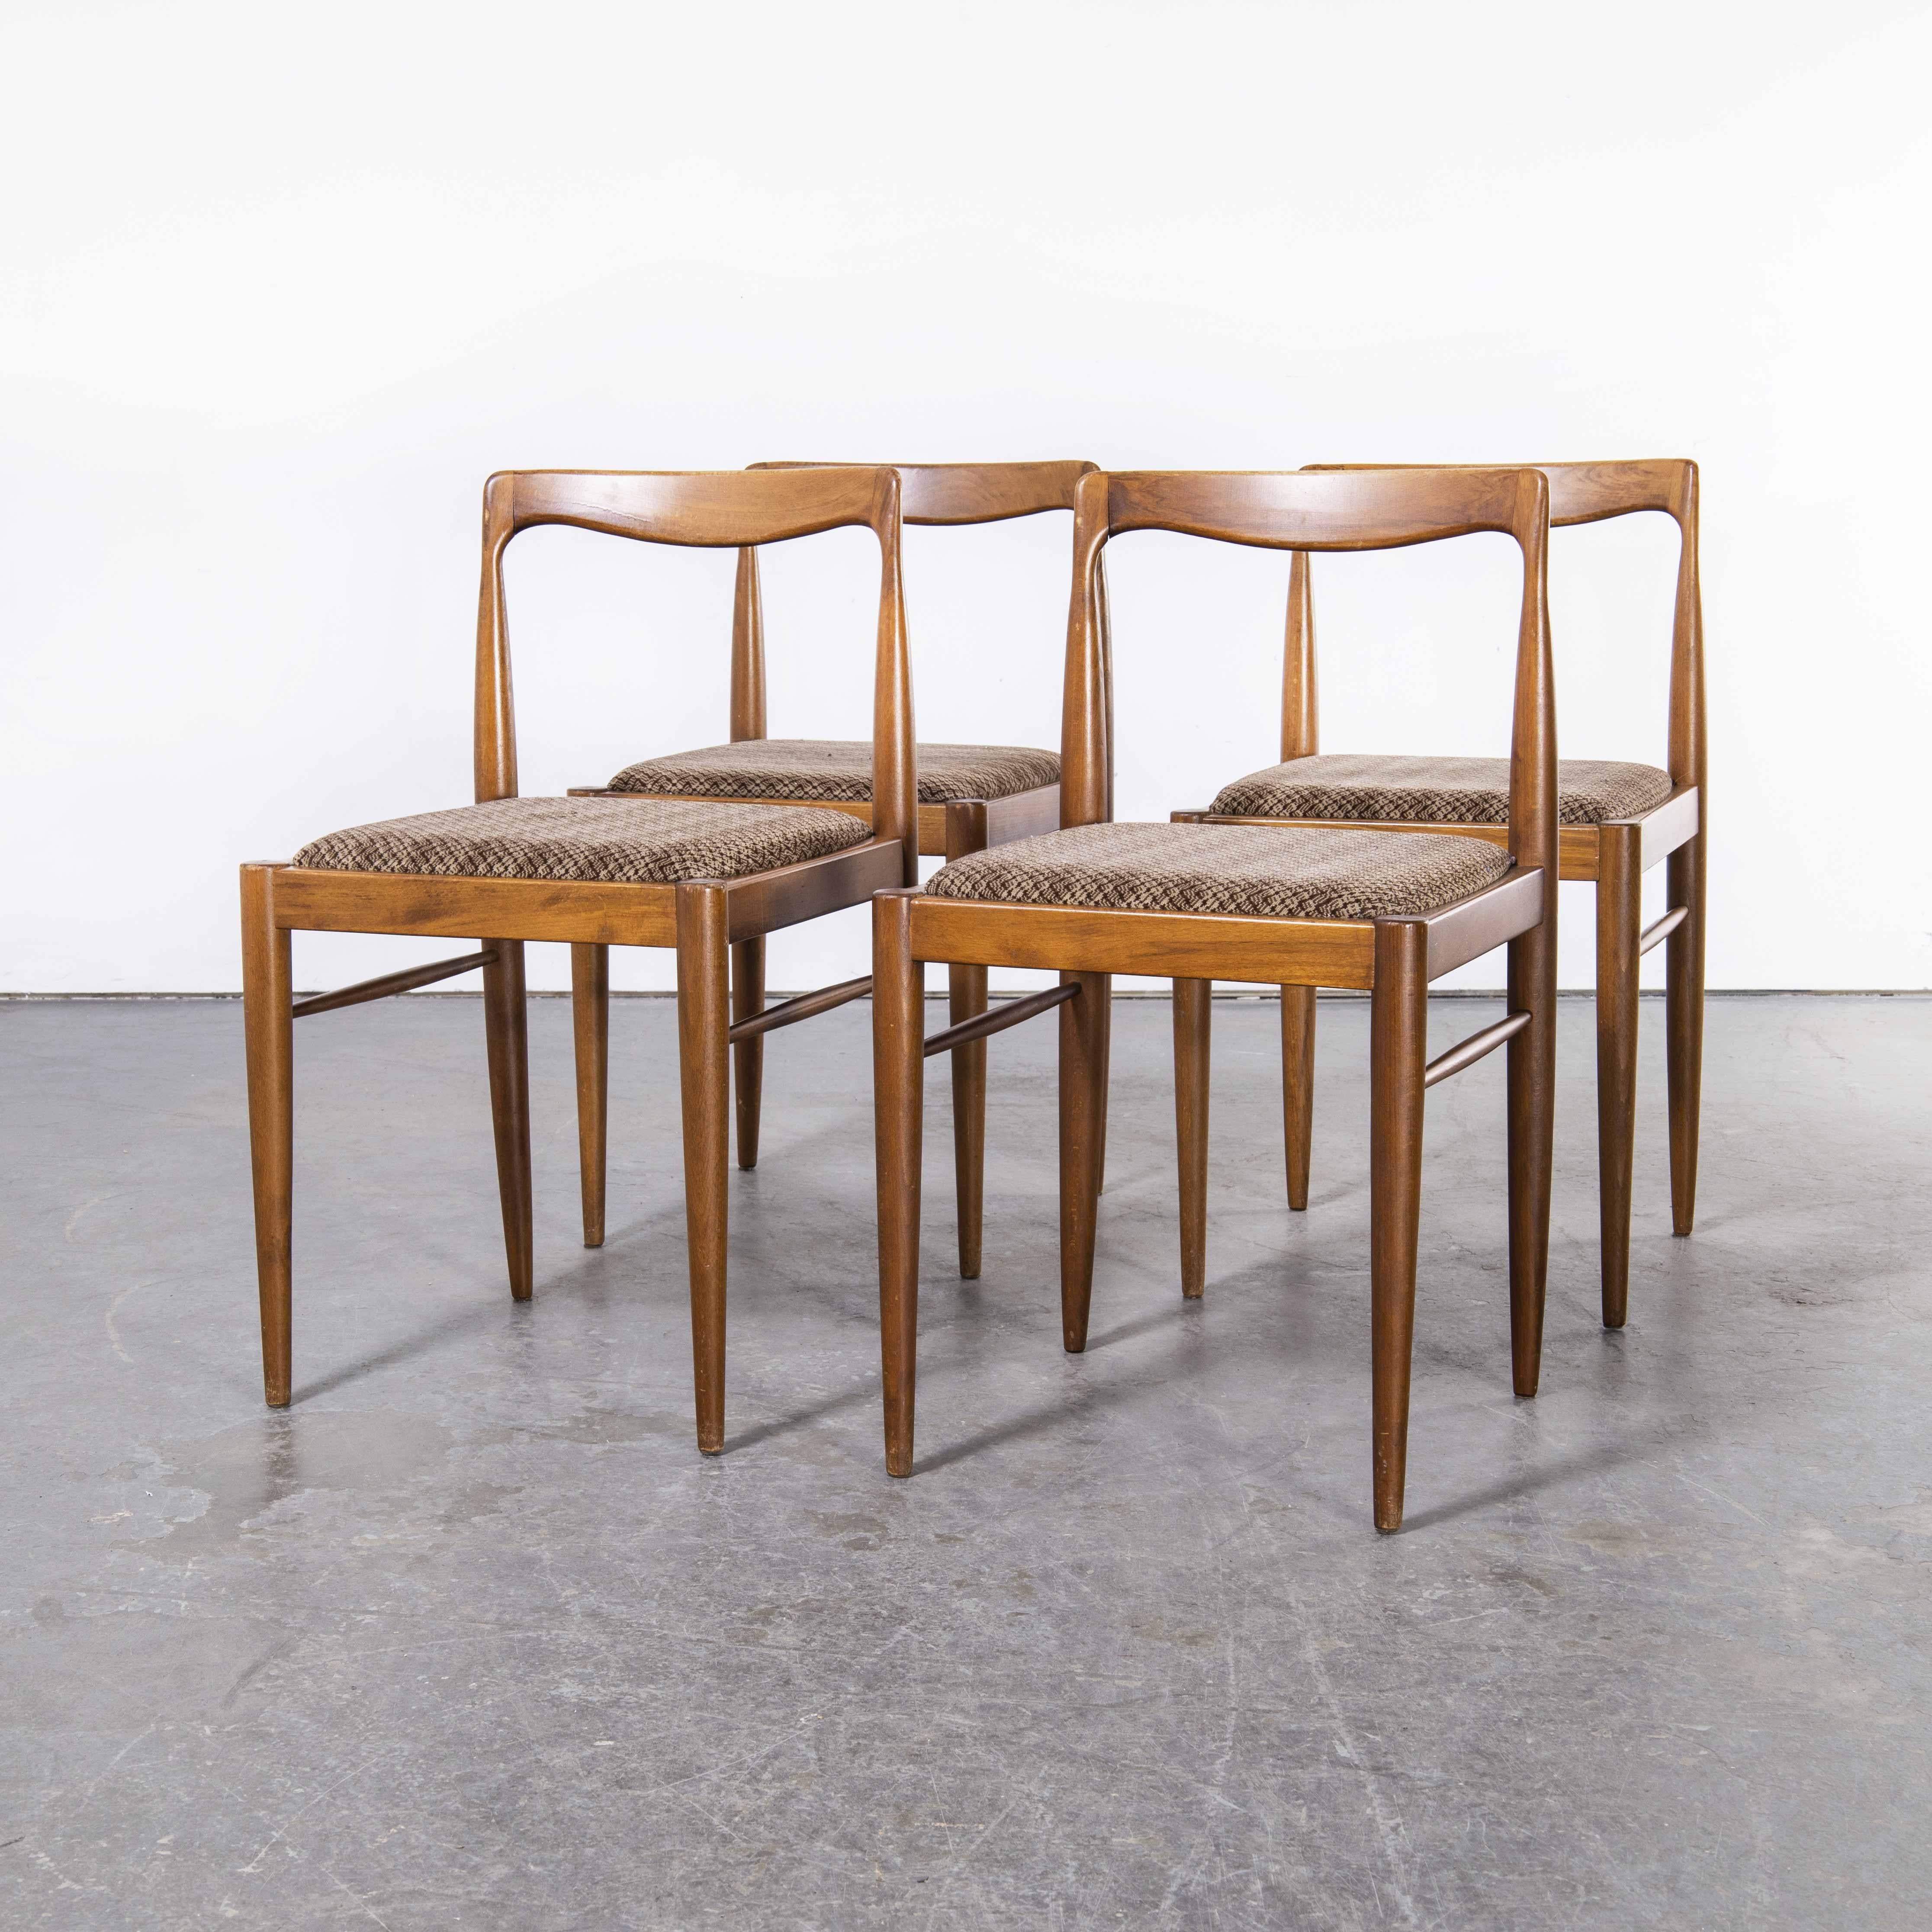 1950’s Mid Century teak dining chairs – set of four
1950’s Mid Century teak dining chairs – set of four. Stunningly simple design produced in the Czech republic. Czech was one of the largest producers of high quality mid century furniture working